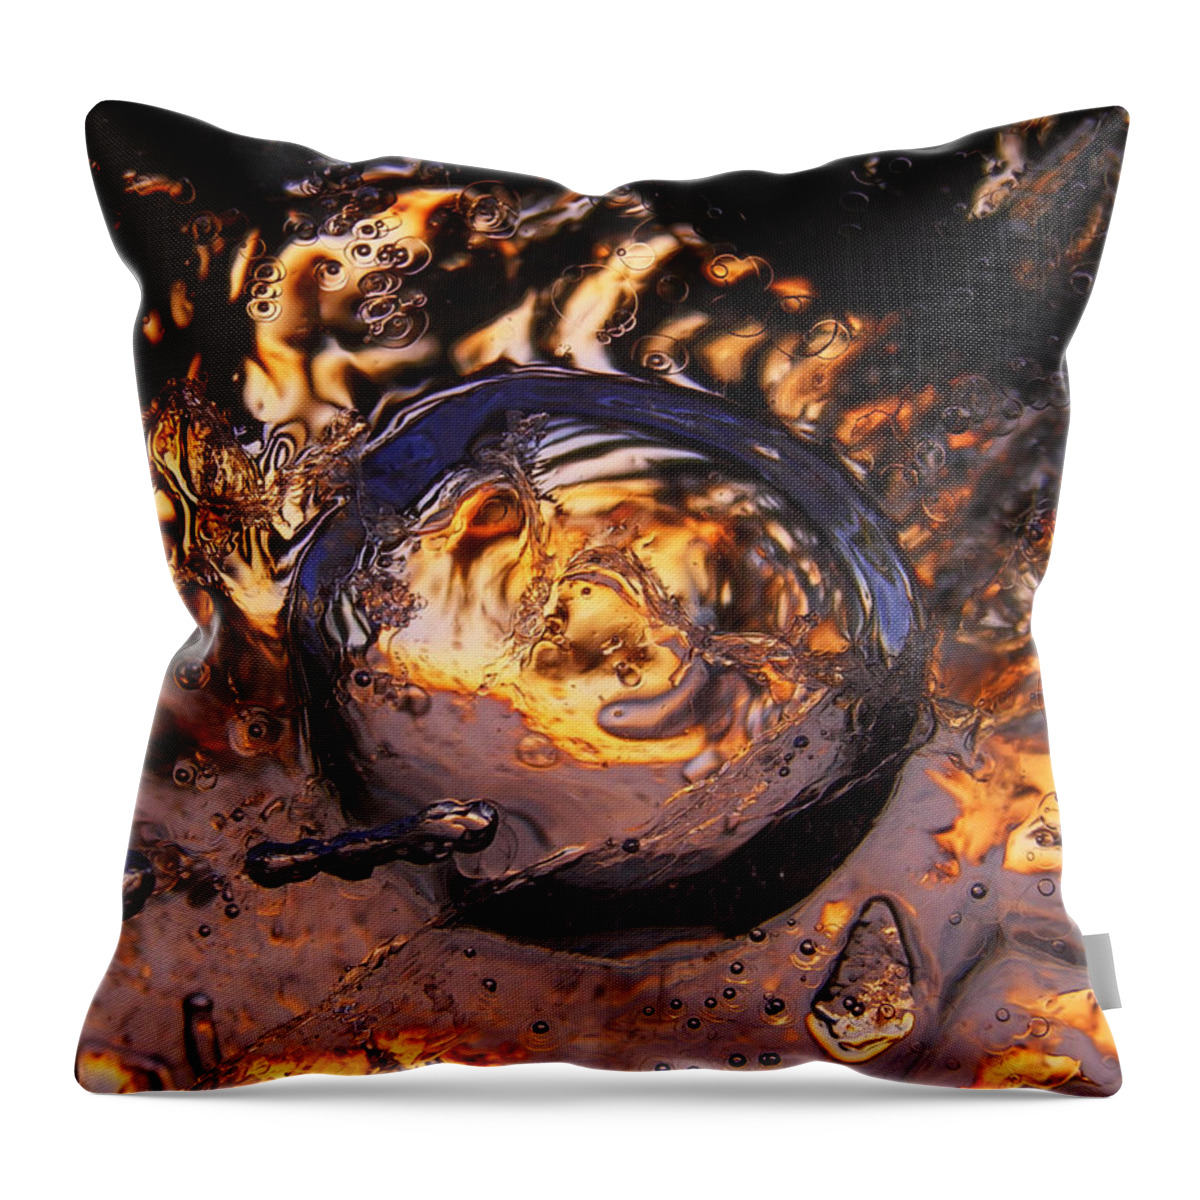 Whirl Throw Pillow featuring the photograph Swirly Gateway by Sami Tiainen